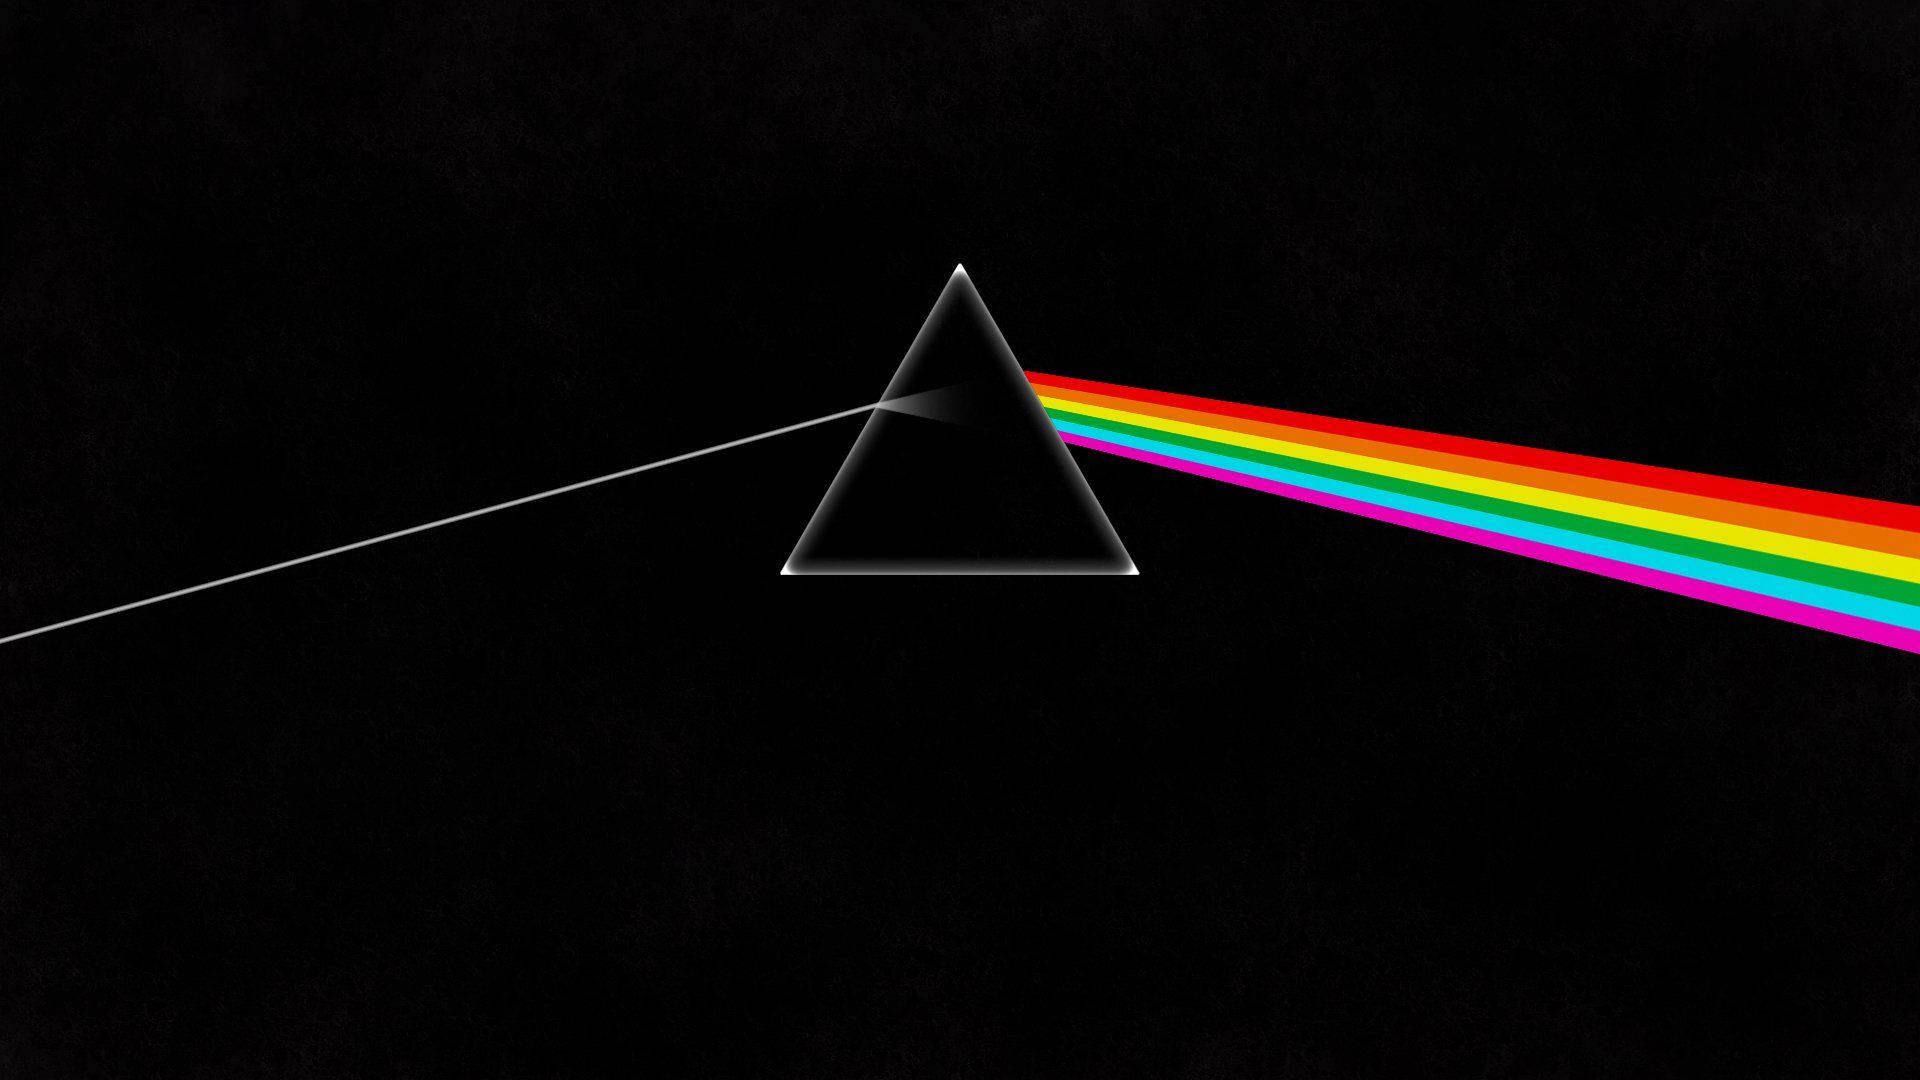 Listen to Pink Floyd with majestic art Wallpaper